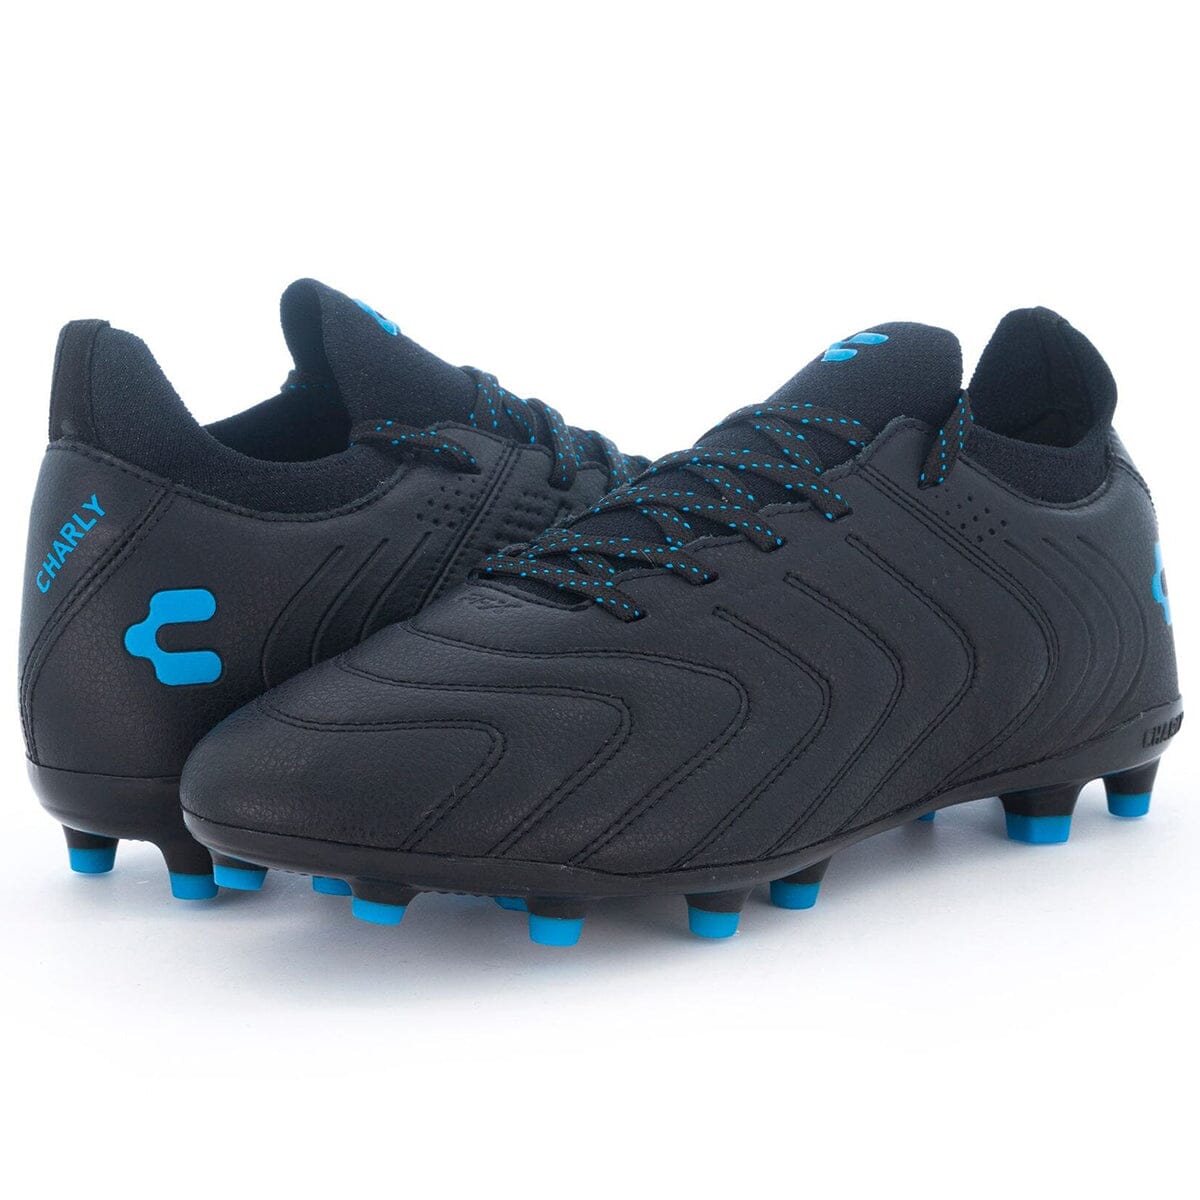 Charly Men's Encore RL FG Soccer Cleats | 1086361002 Cleats Charly 